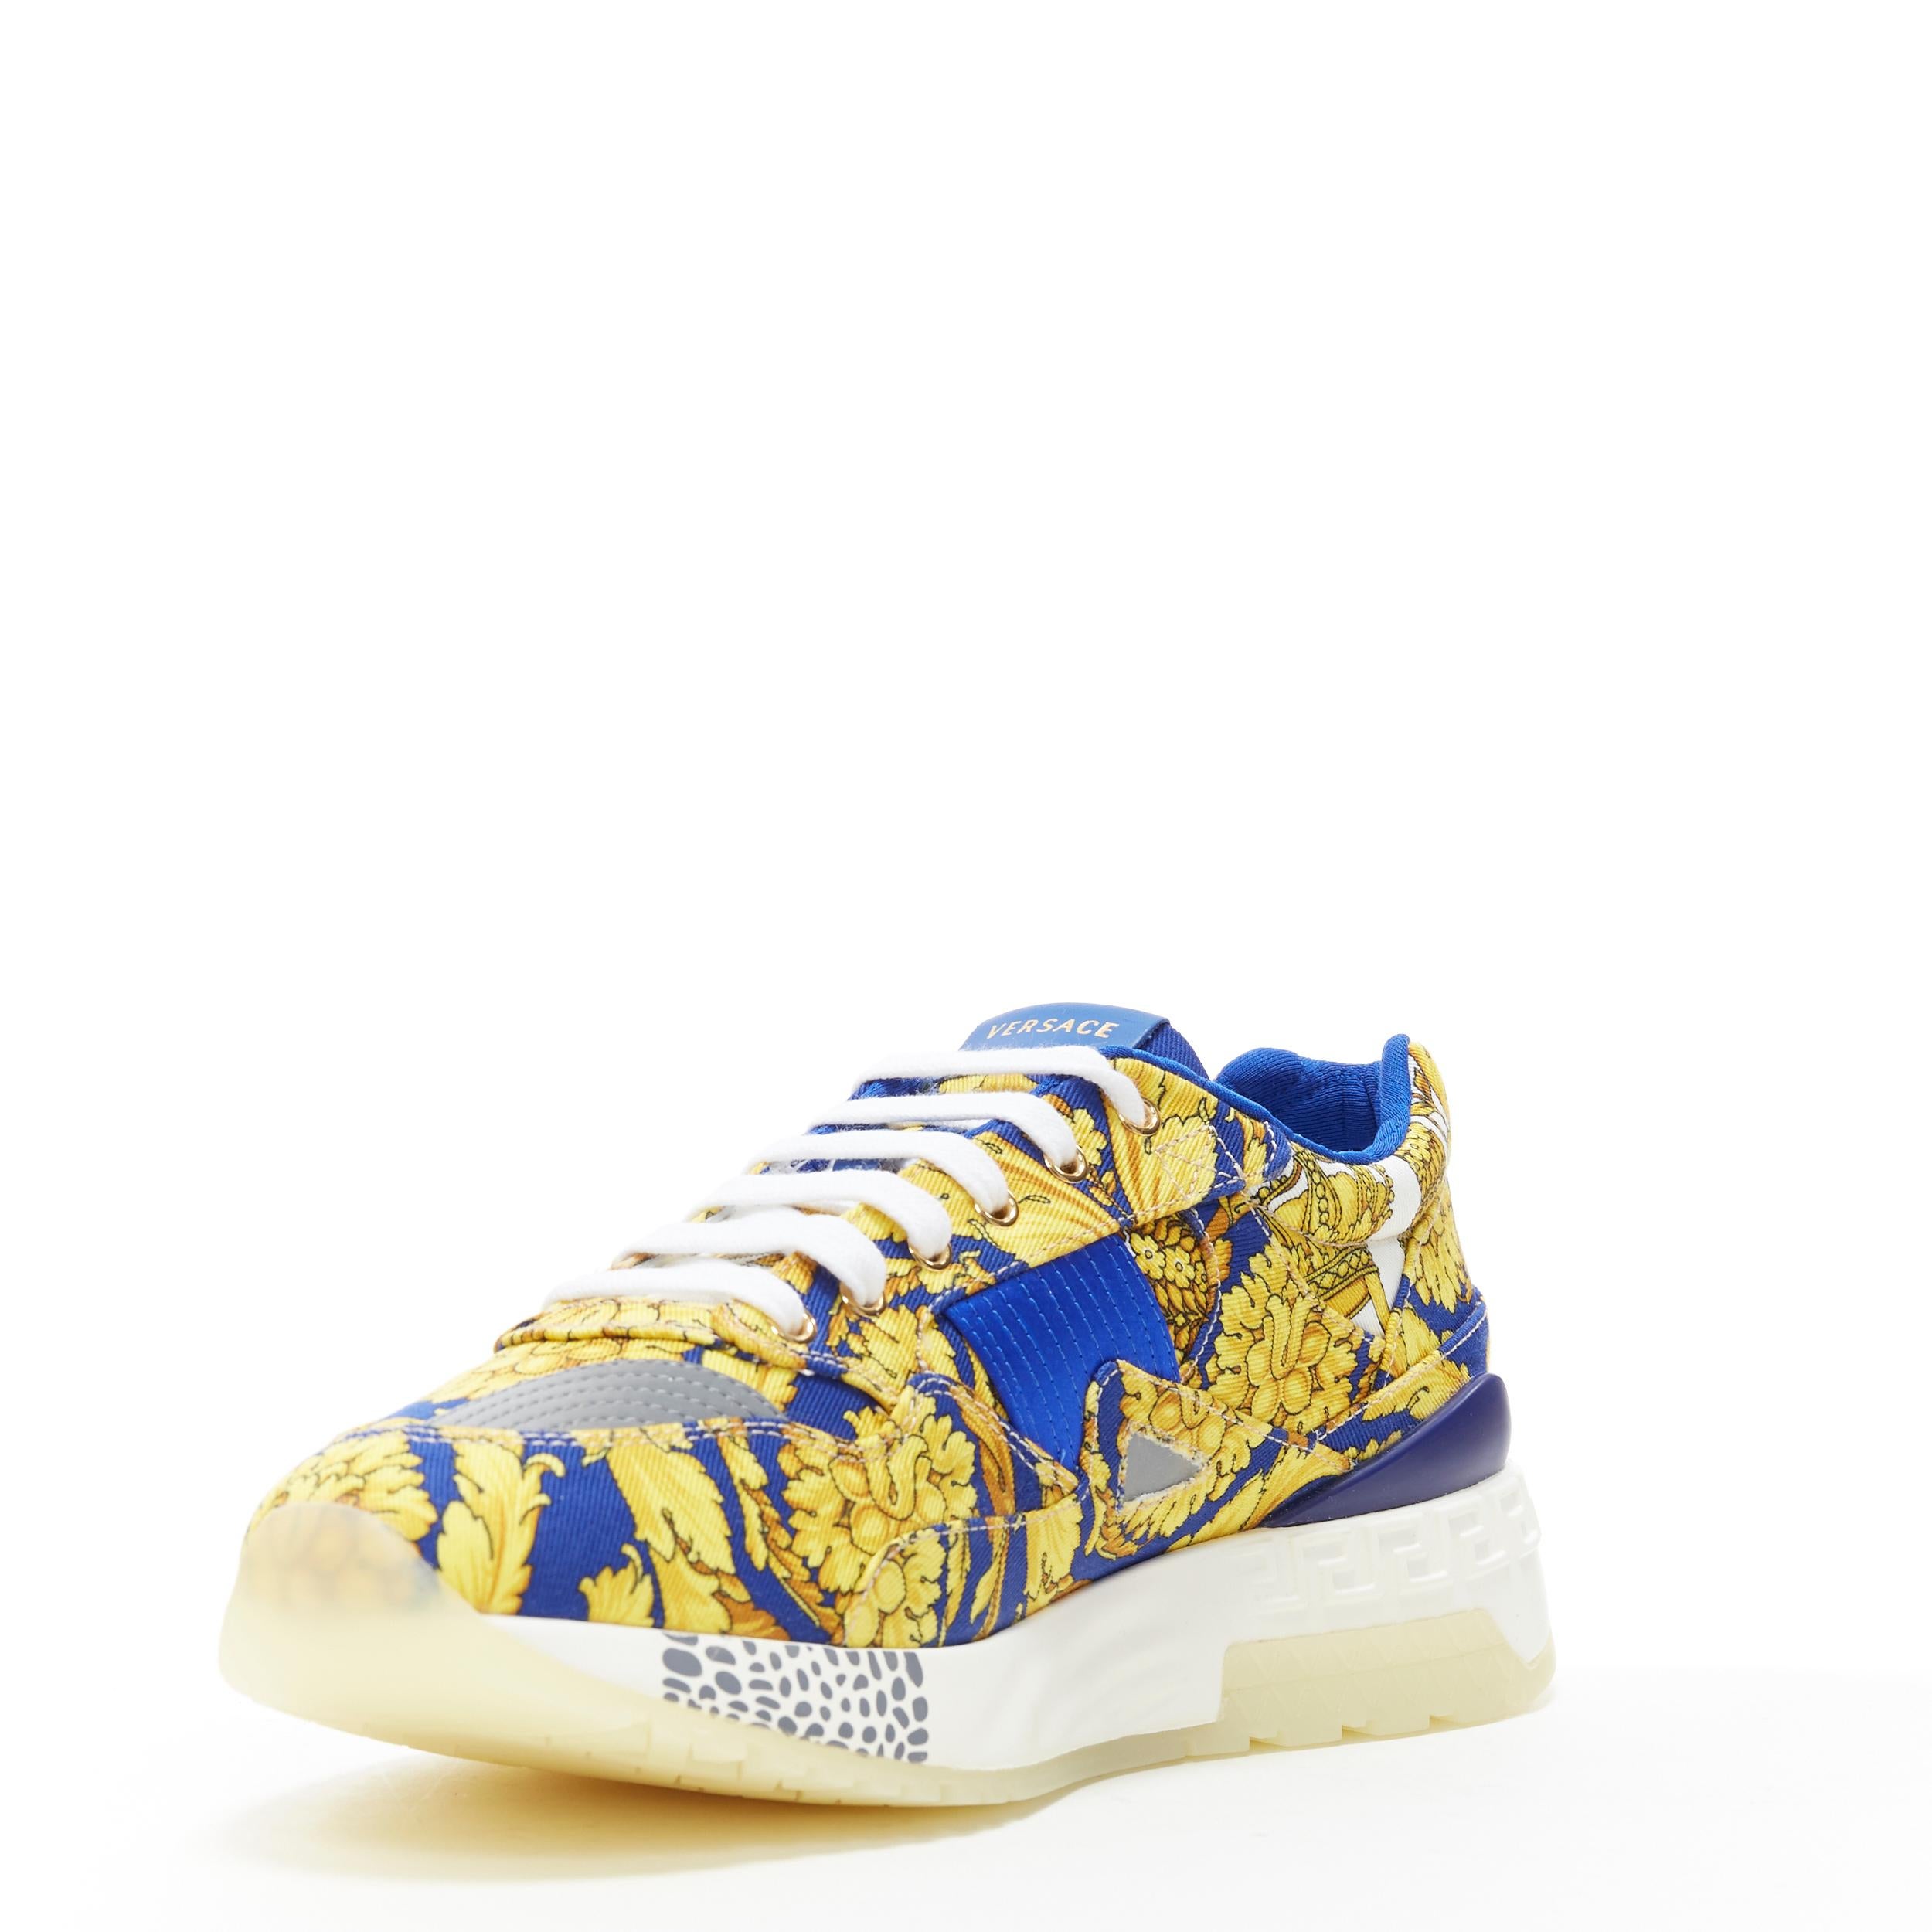 blue and yellow versace sneakers